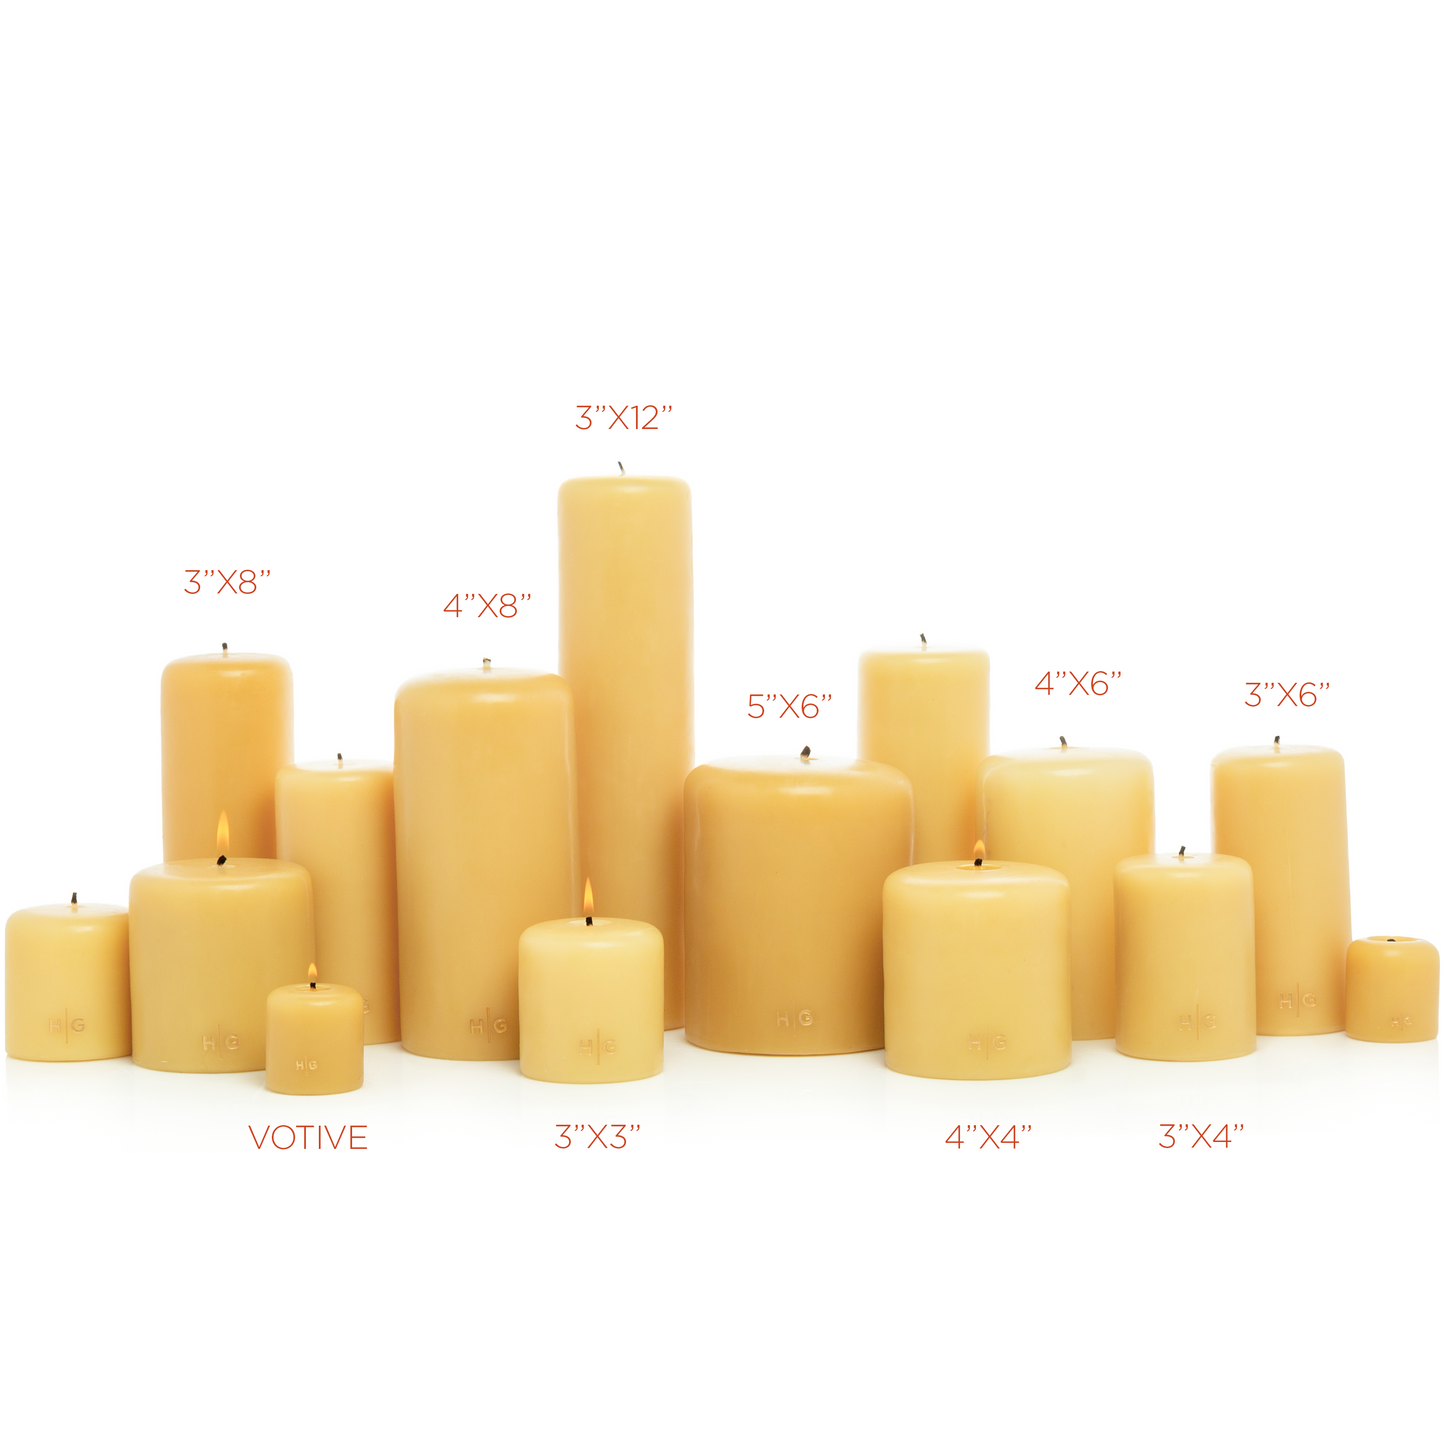 Amber Unscented Pillar Candle, 3"x4"